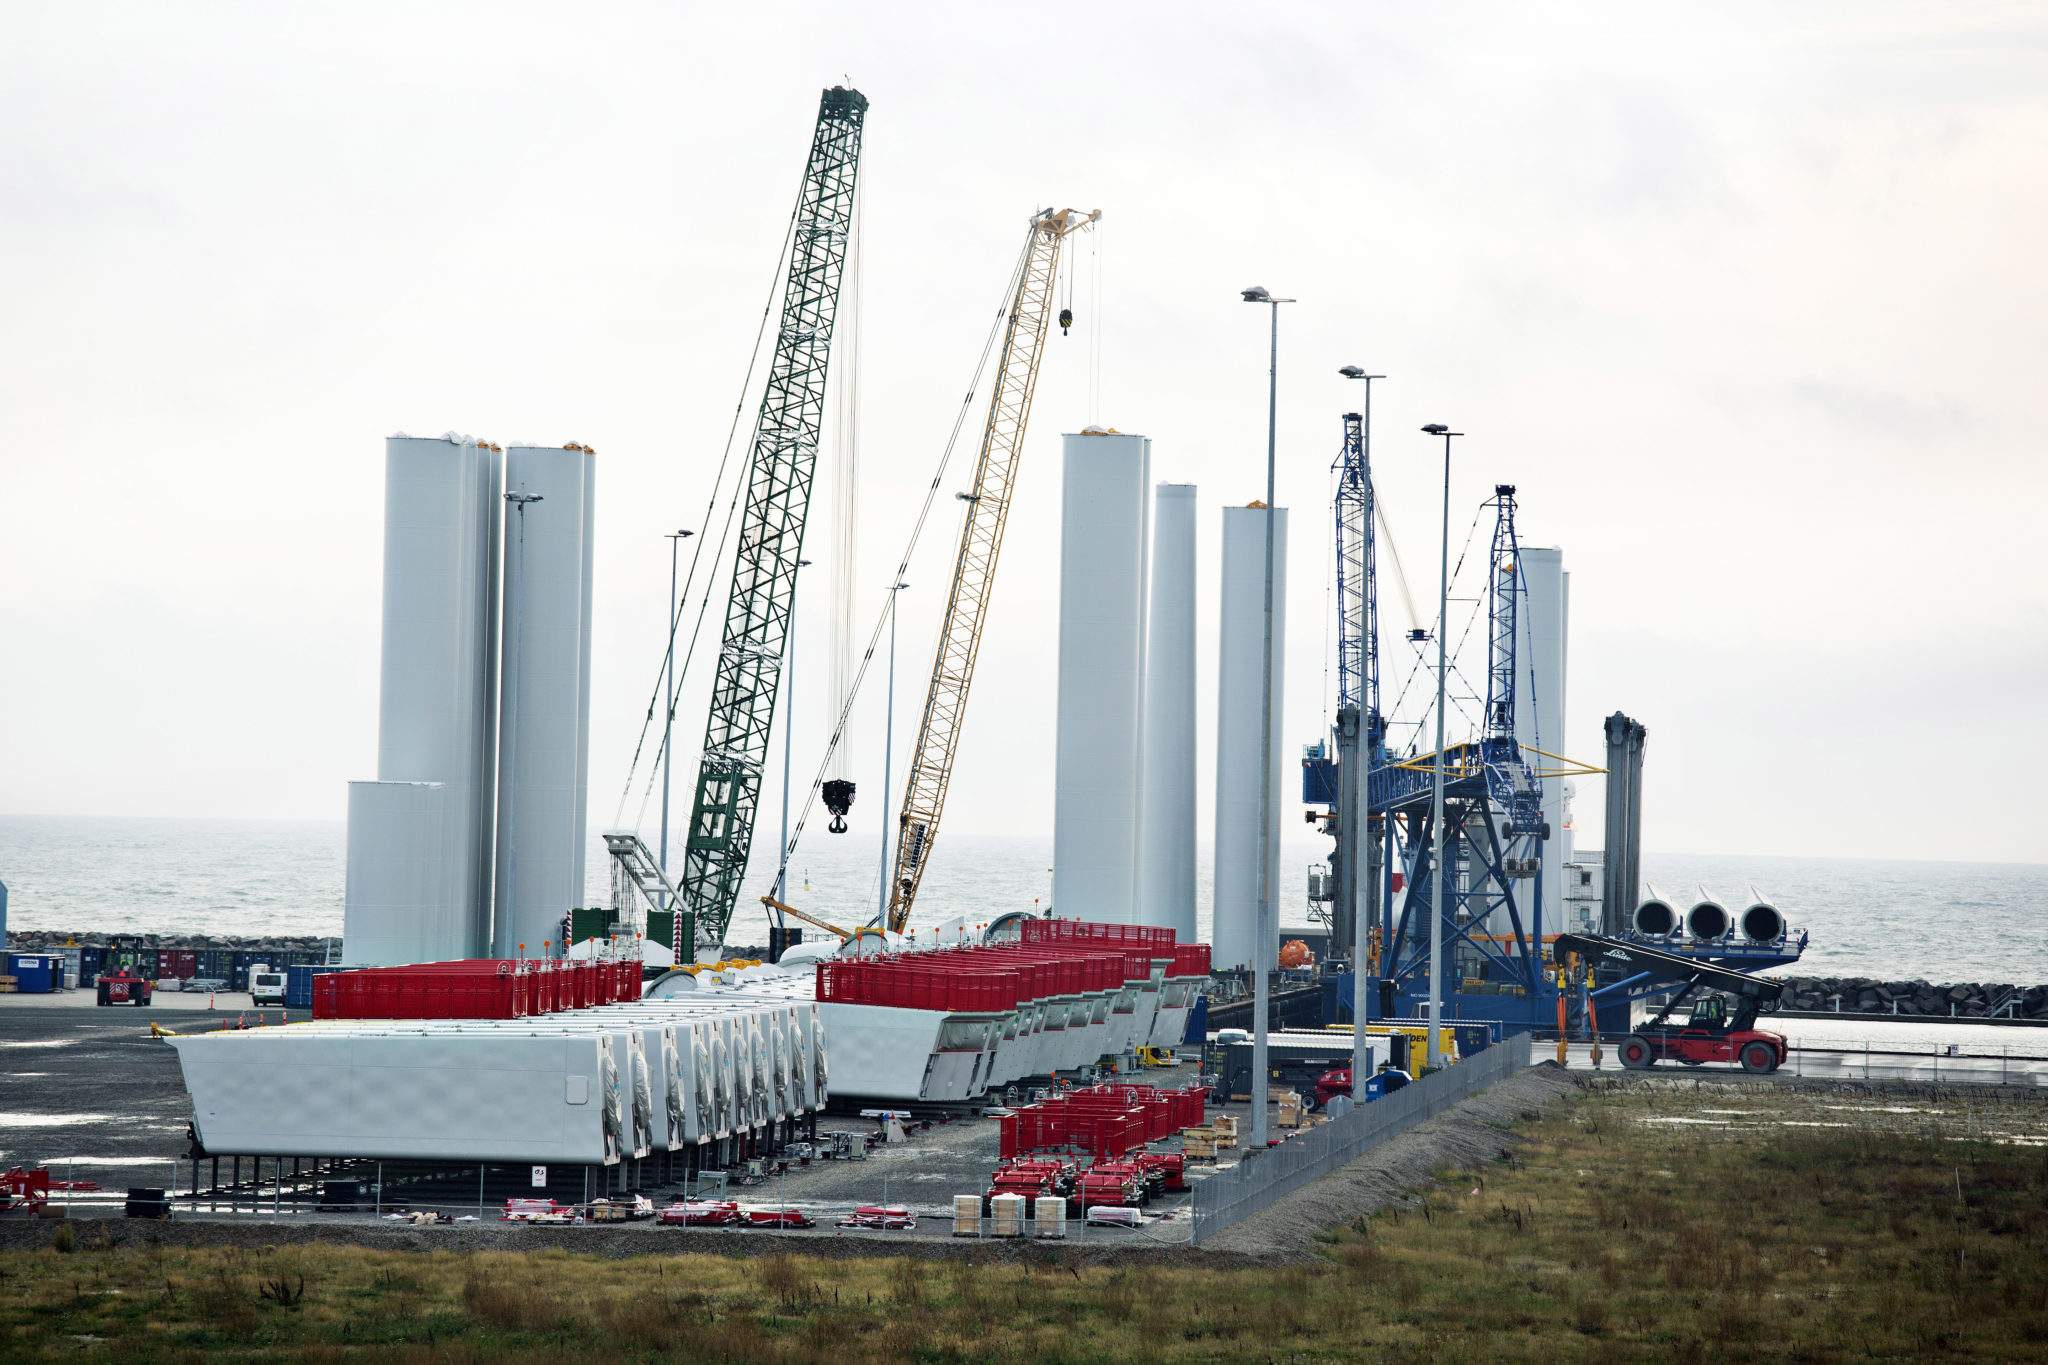 Pre-assembly at Grenaa Hvn for Anholt Offshore Wind Farm